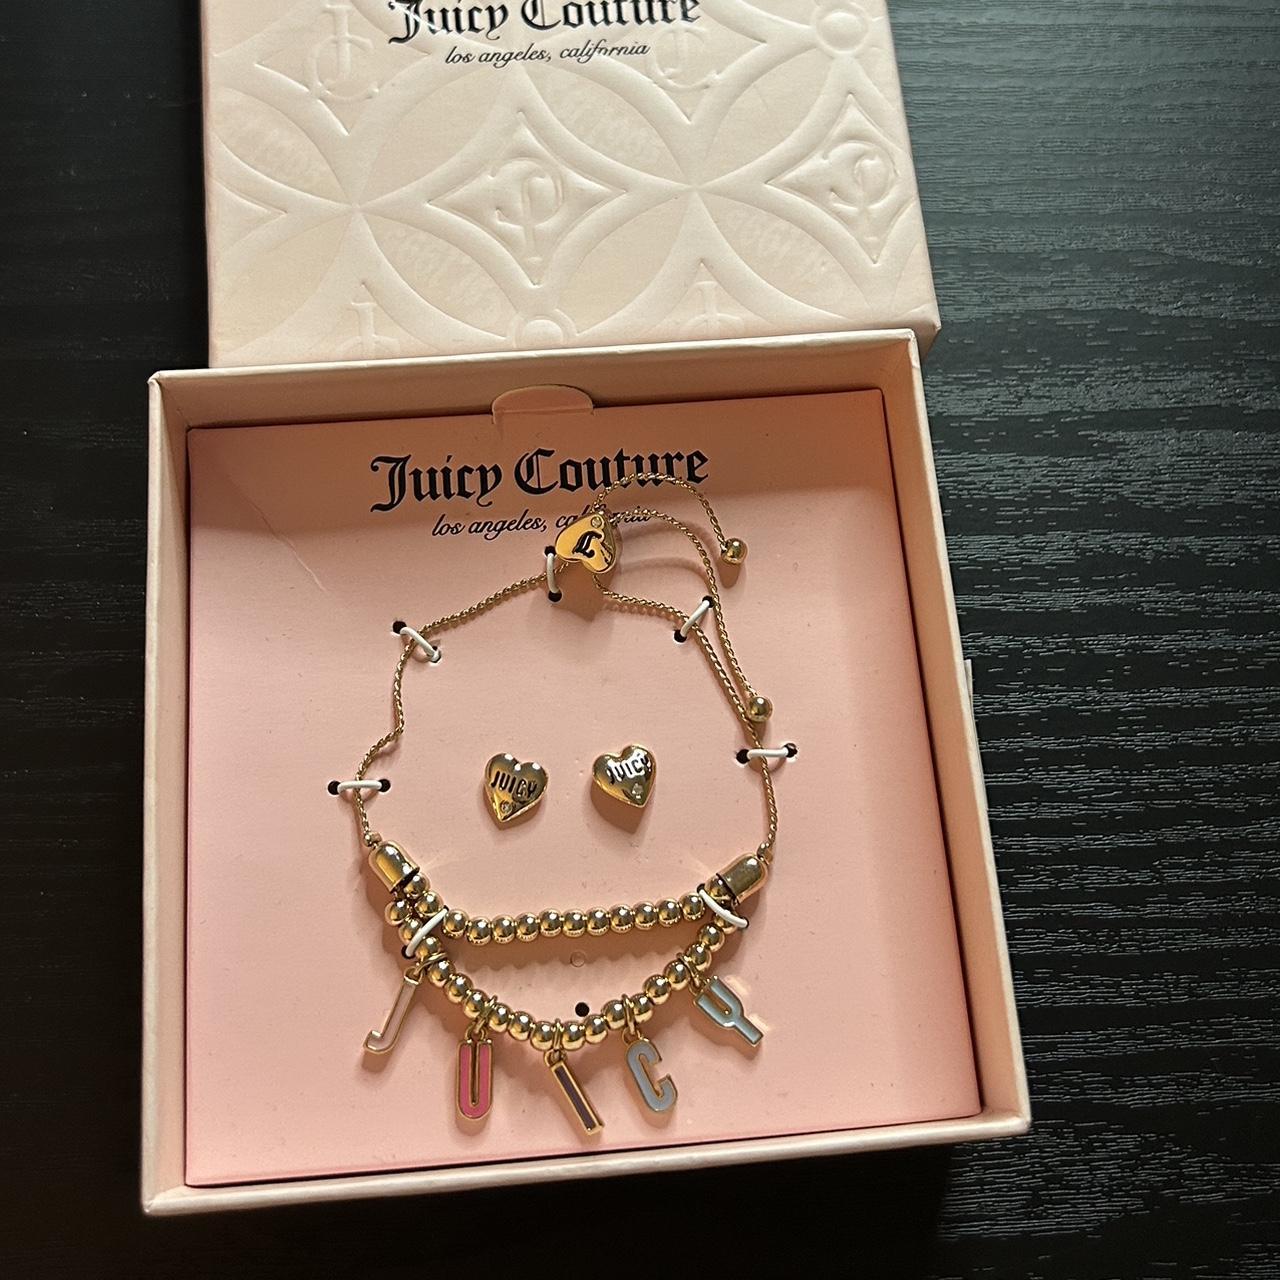 Juicy Couture Jewelry Set - $21 - From Marina